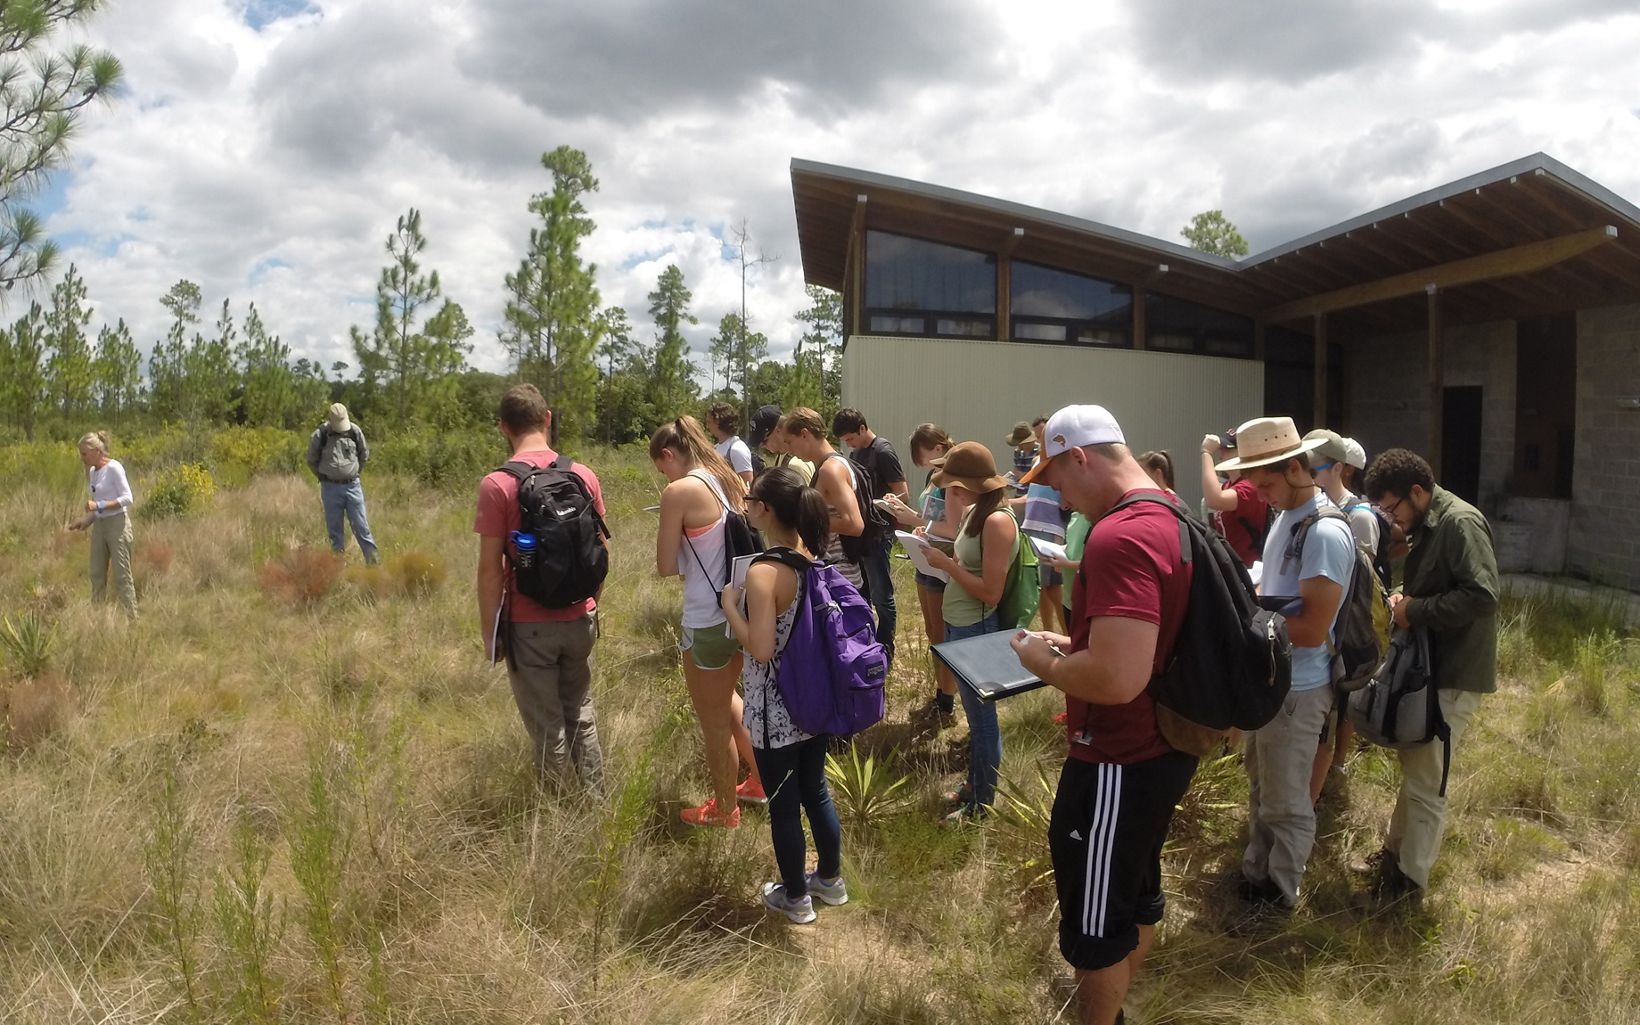 Botany Class Students from Florida State University visit the preserve to study the native plants at Apalachicola Bluffs and Ravines Preserve.